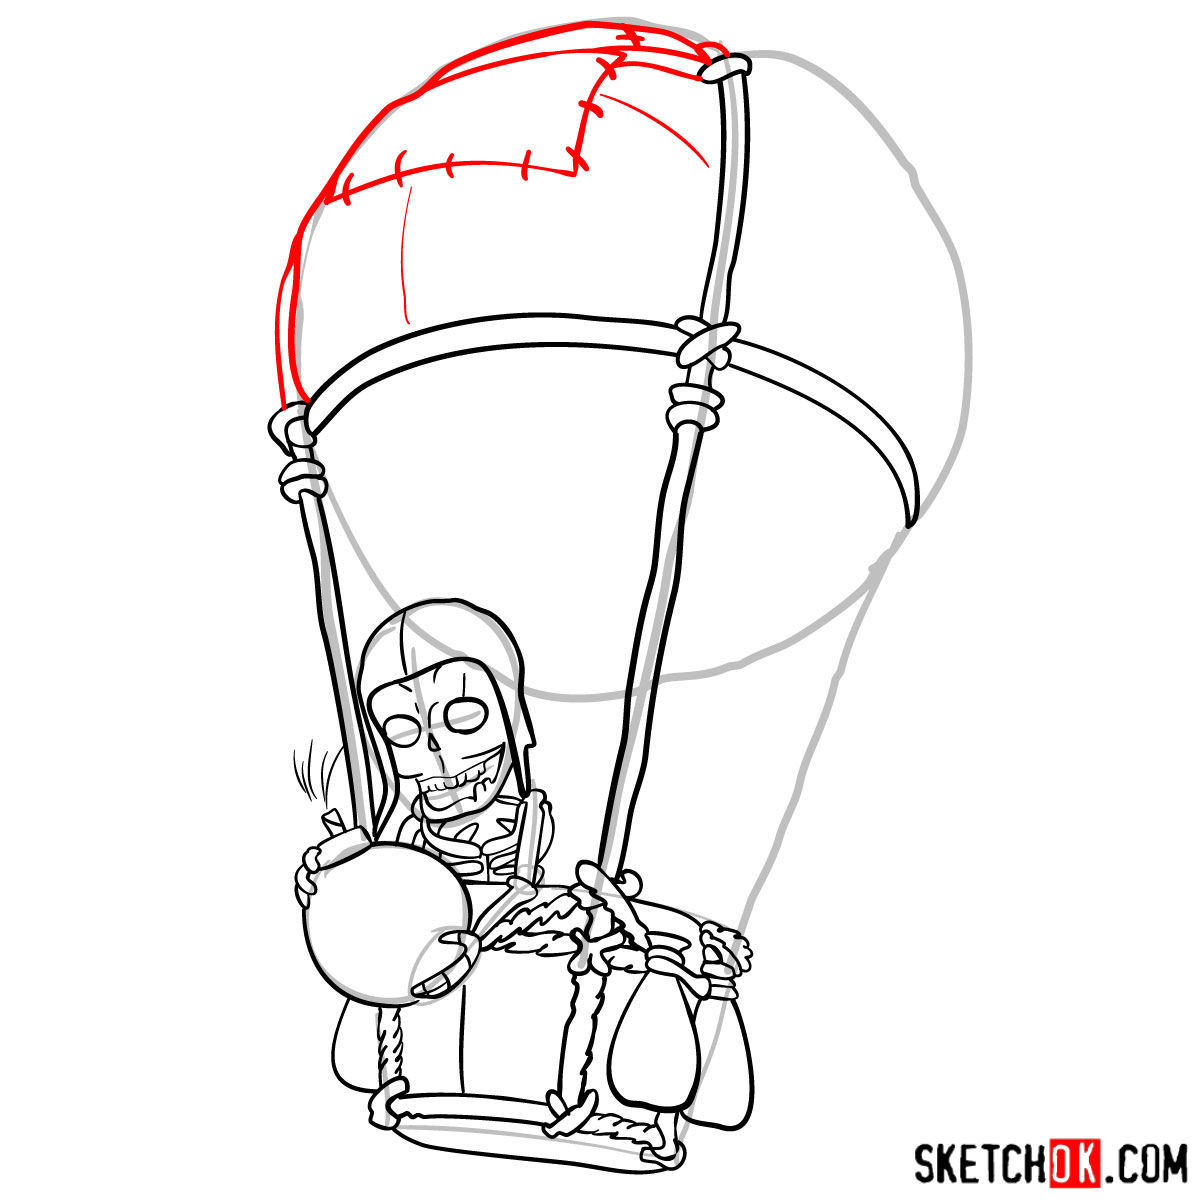 How to draw Balloon with a skeleton - step 09